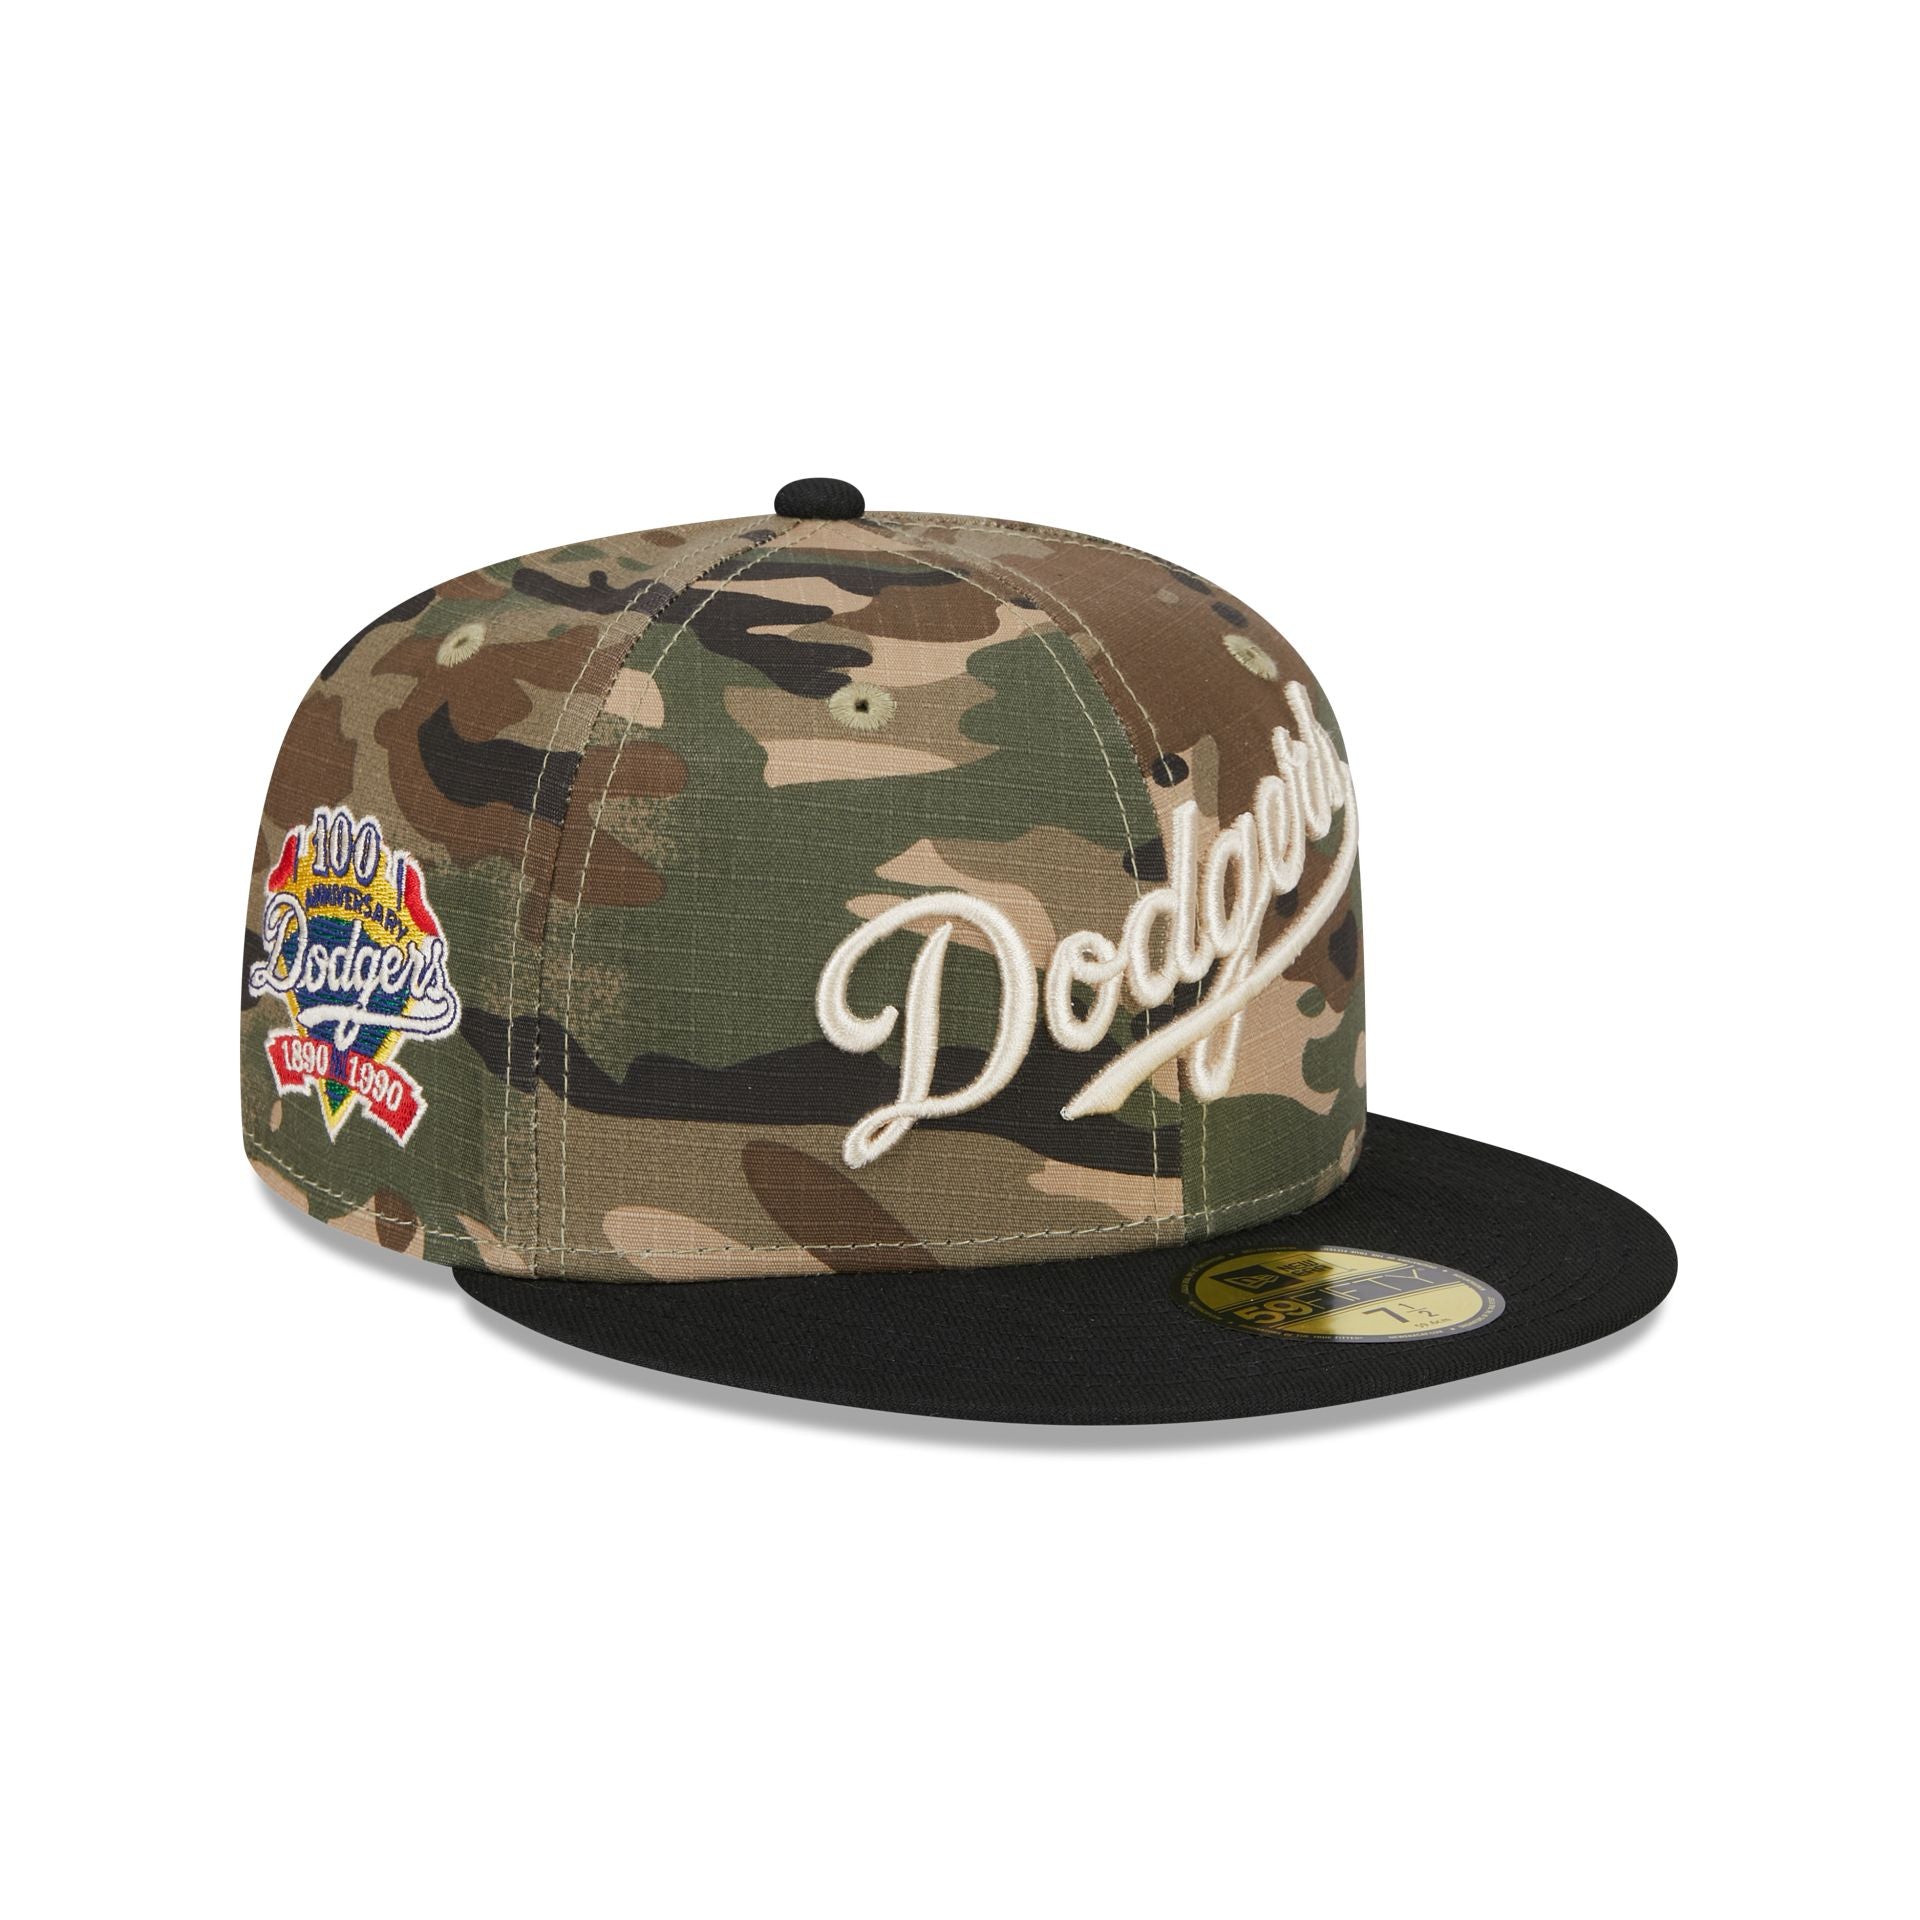 Los Angeles Dodgers Camo Crown 59FIFTY Fitted Hat – New Era Cap